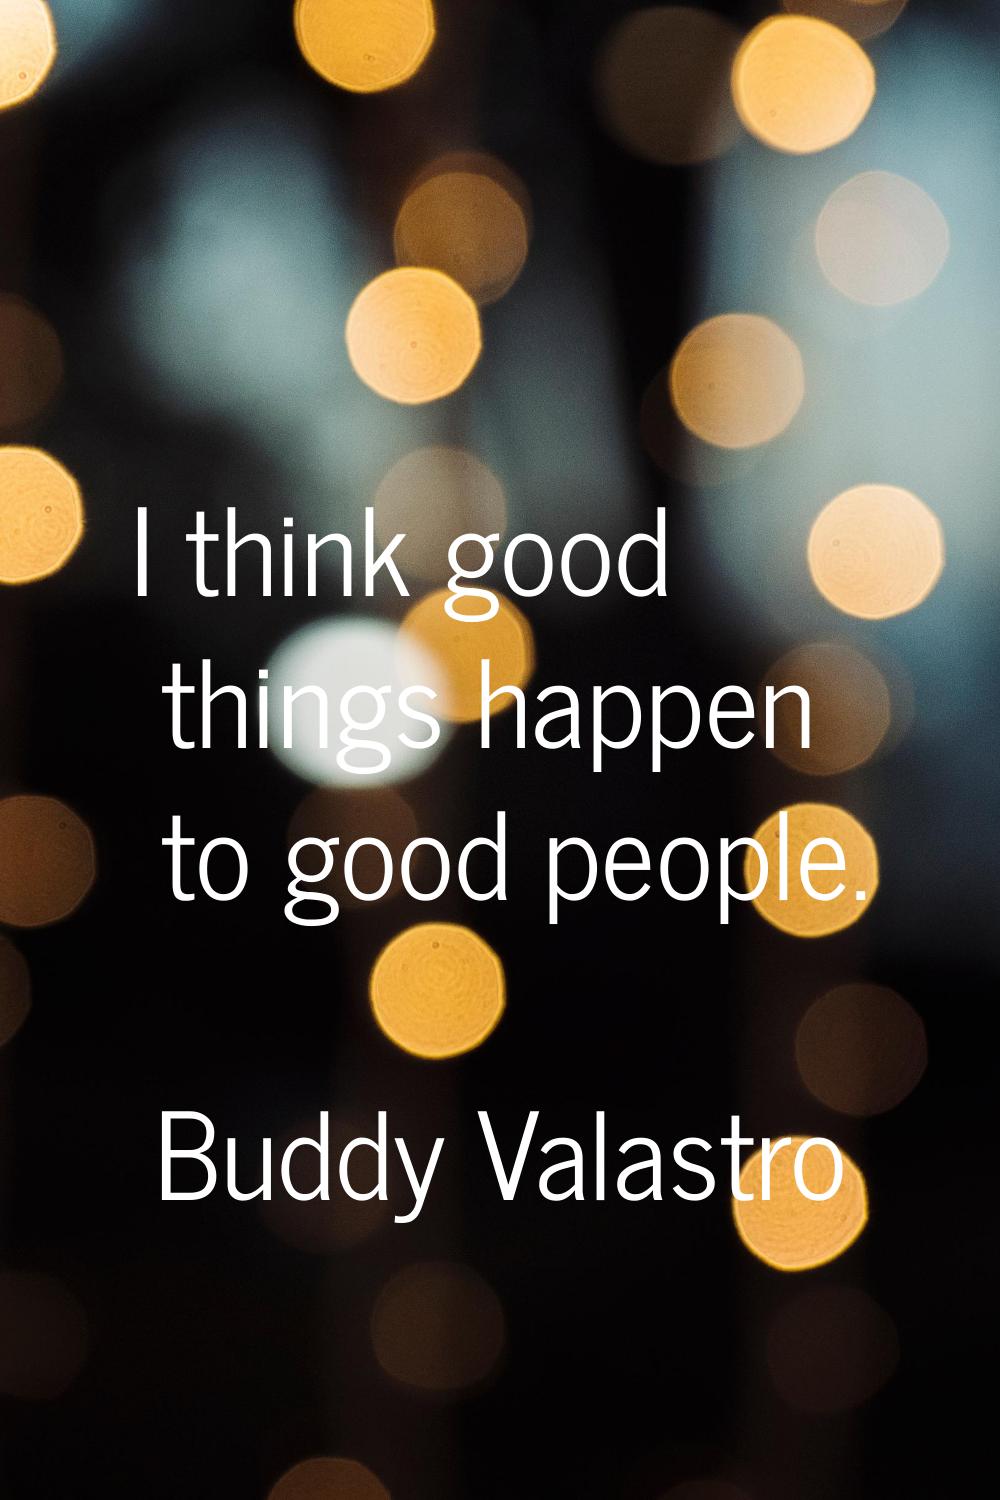 I think good things happen to good people.